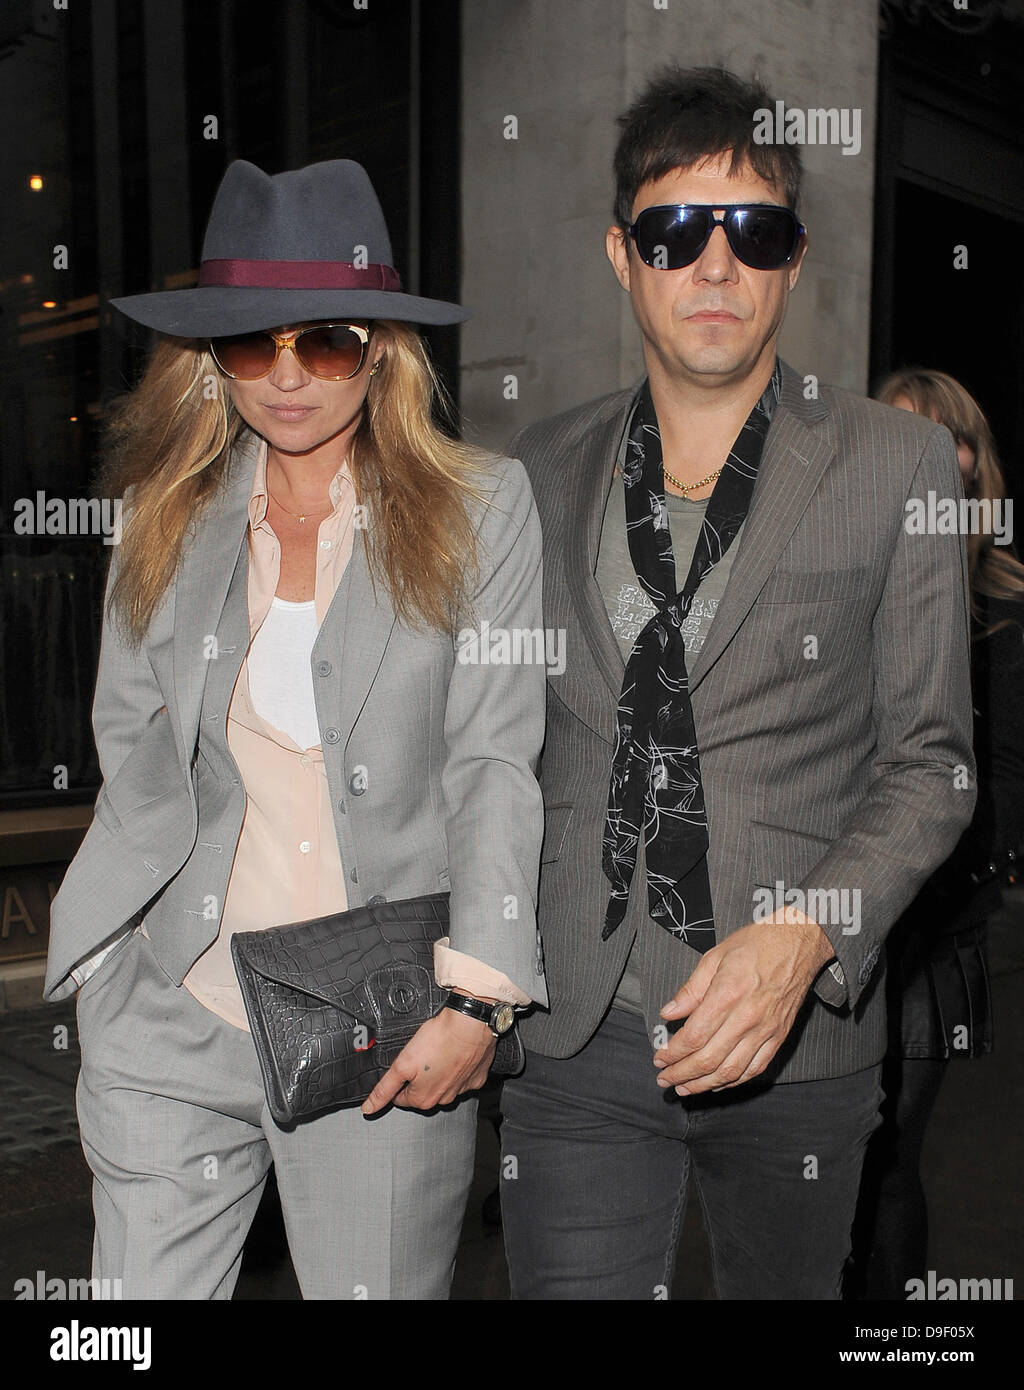 Newly engaged couple Kate Moss and Jamie Hince leave The Wolseley restaurant, having enjoyed a late lunch there with friends. London, England - 23.02.11 Stock Photo